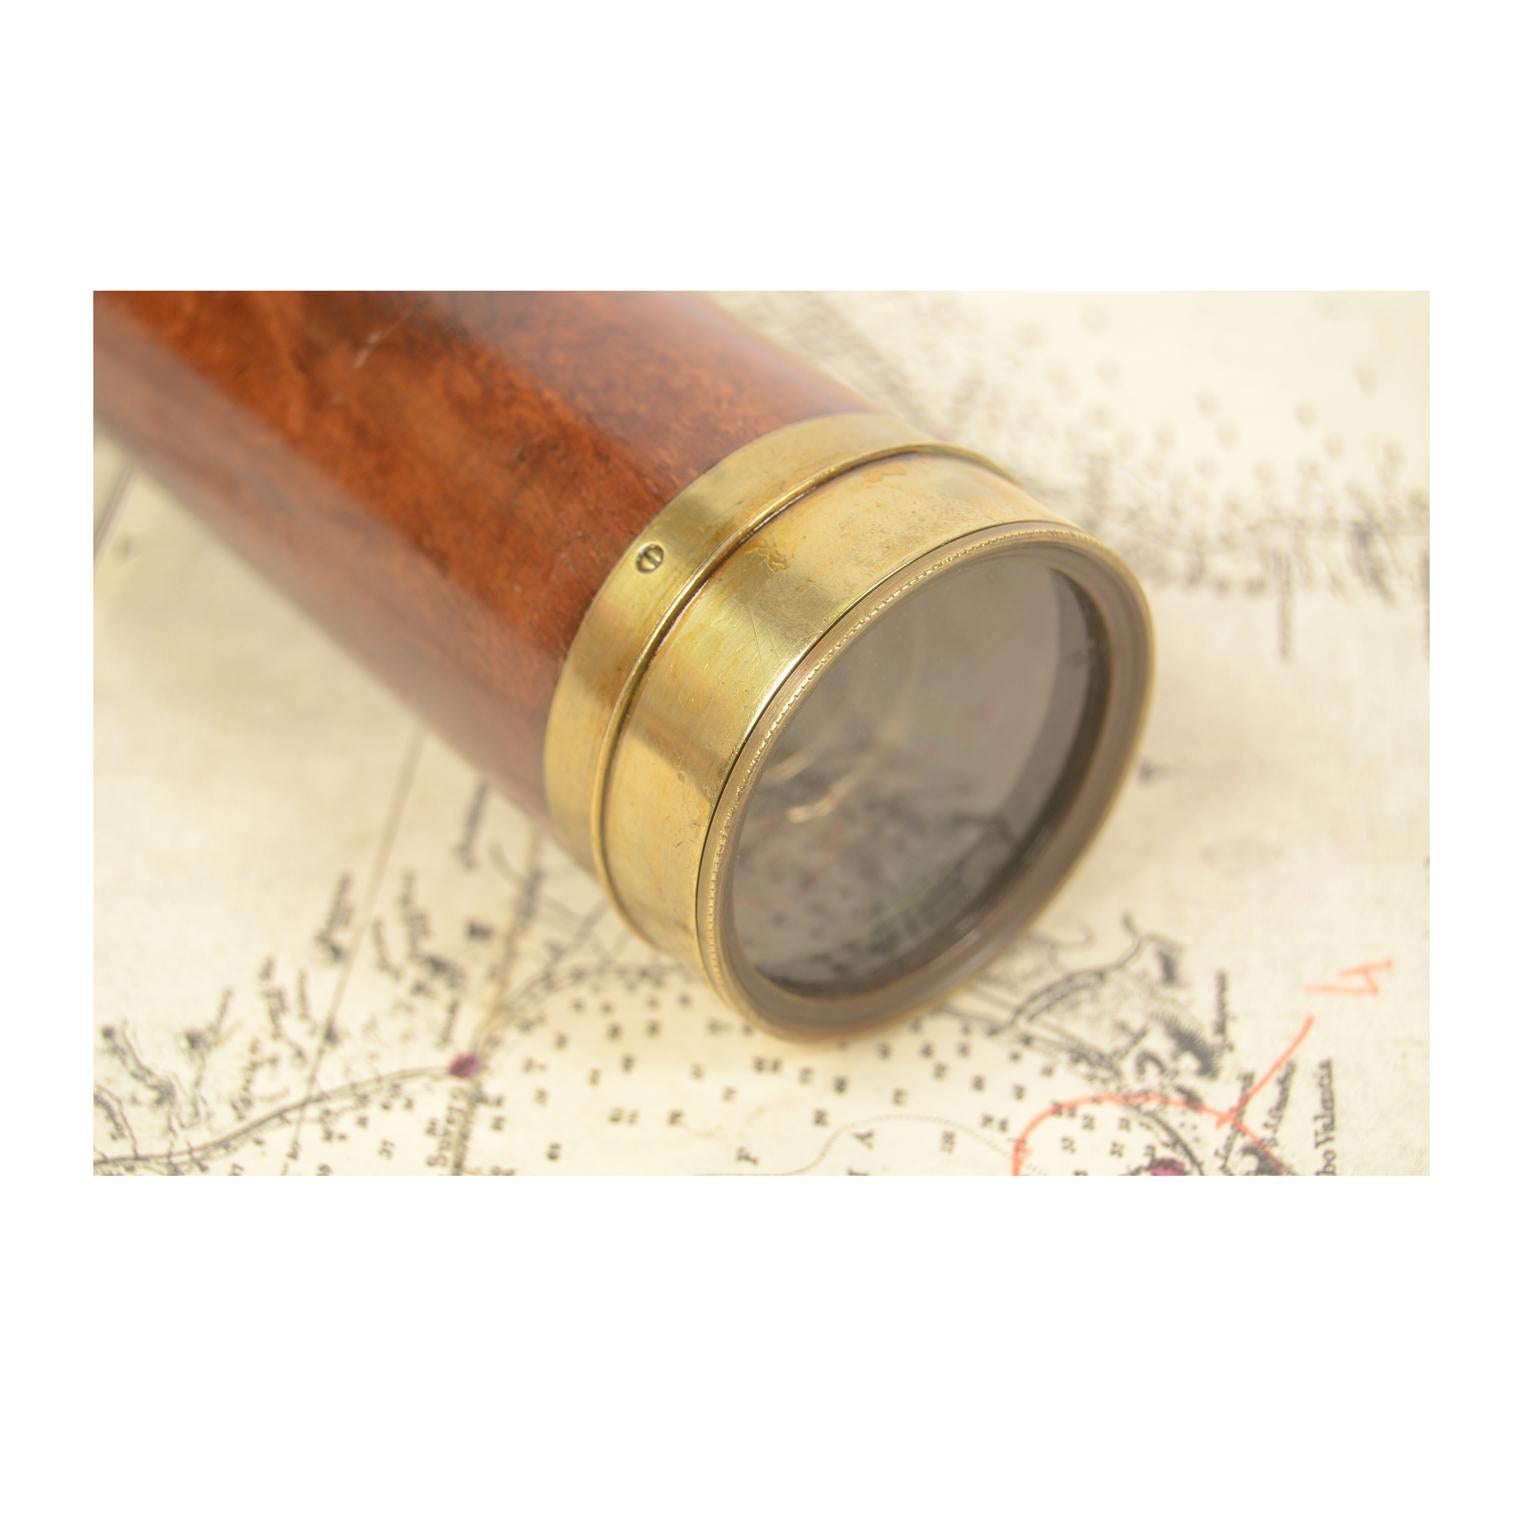 19th Century Antique Brass Telescope with Mahogany Handle English Manufacture 3